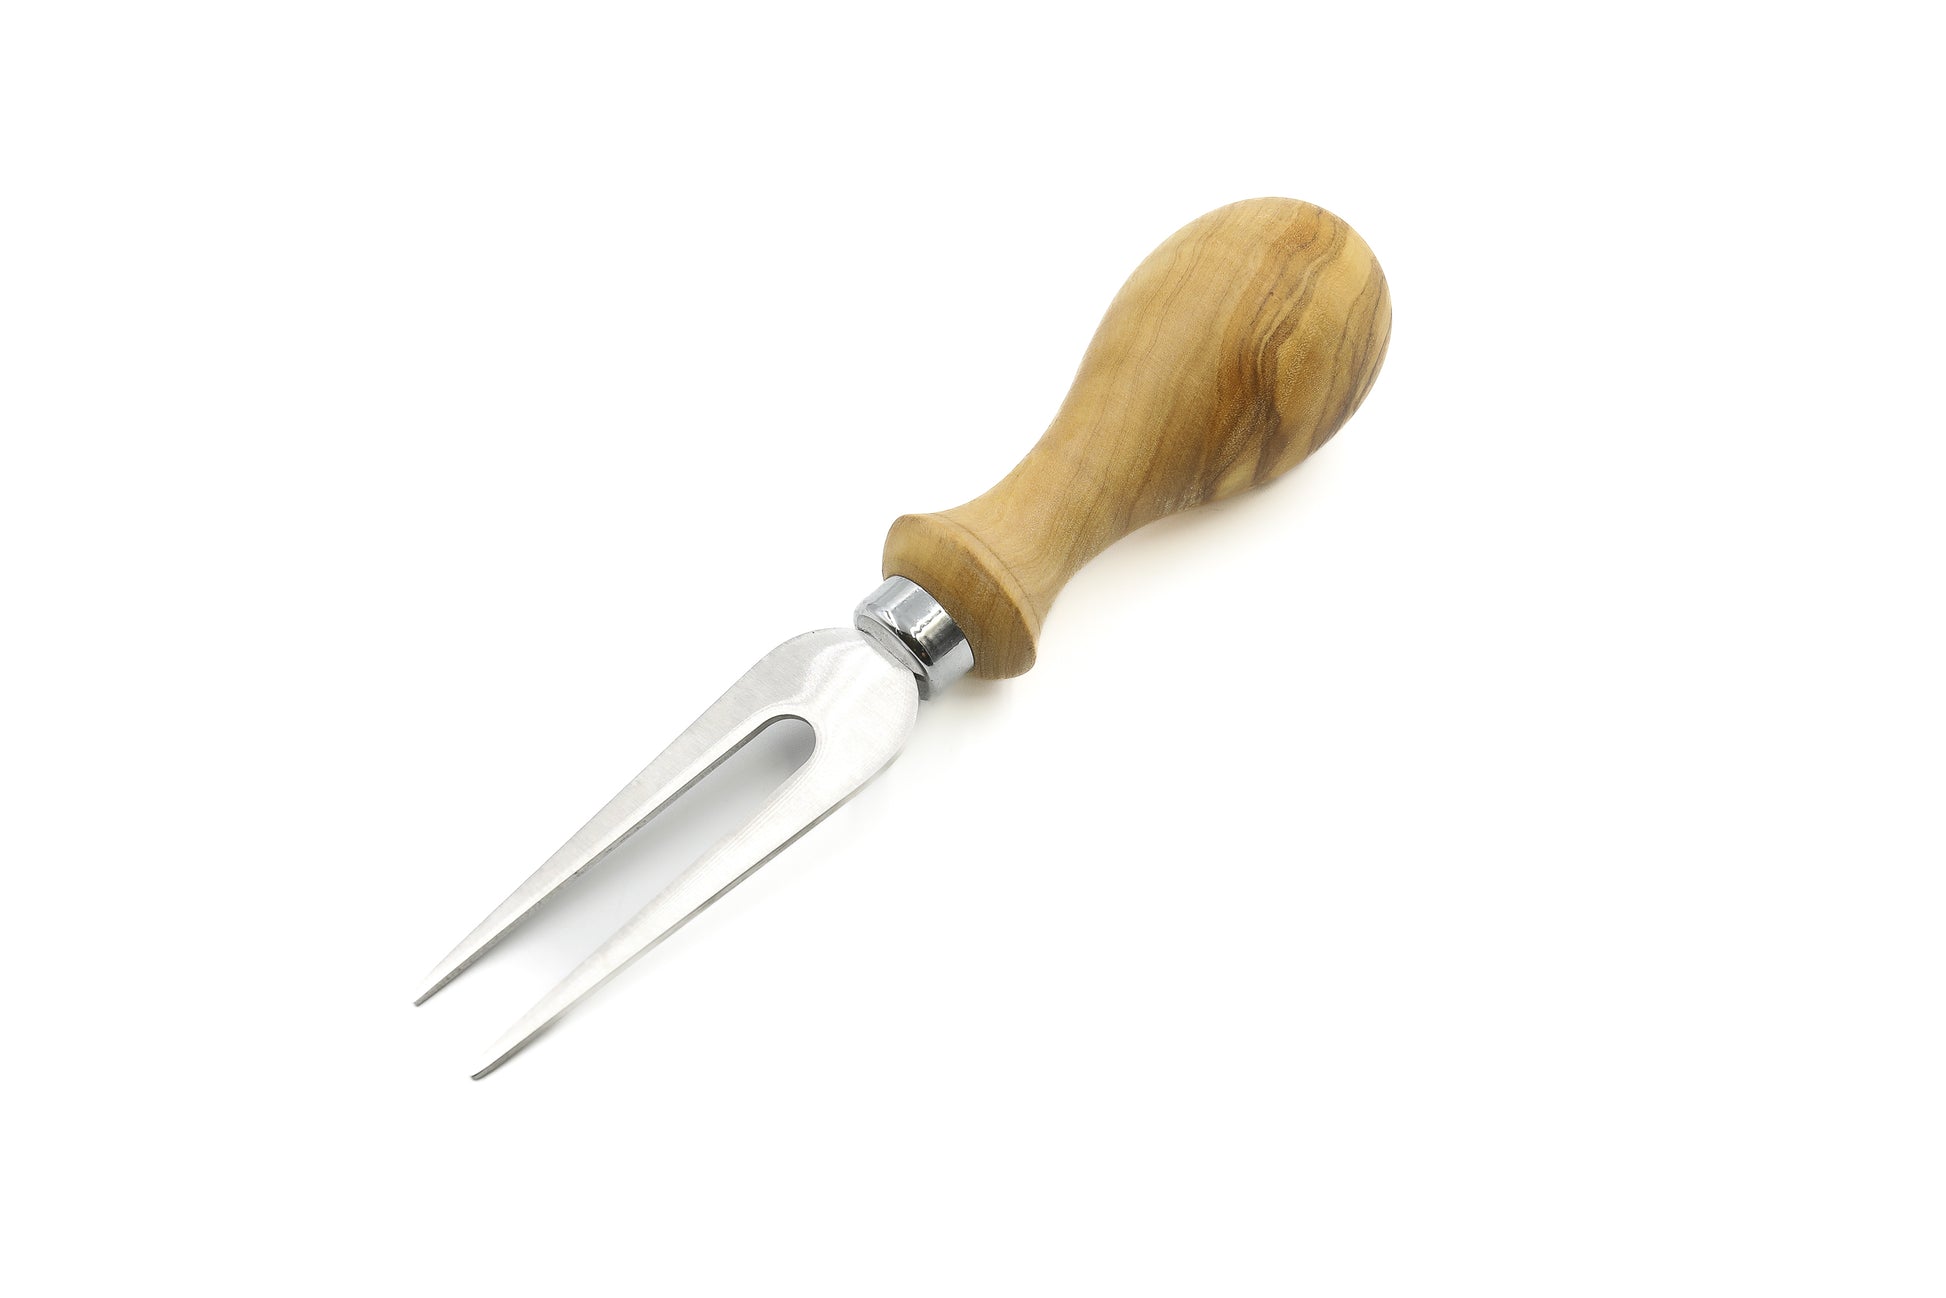 Durable and stylish cheese knives crafted from olive wood